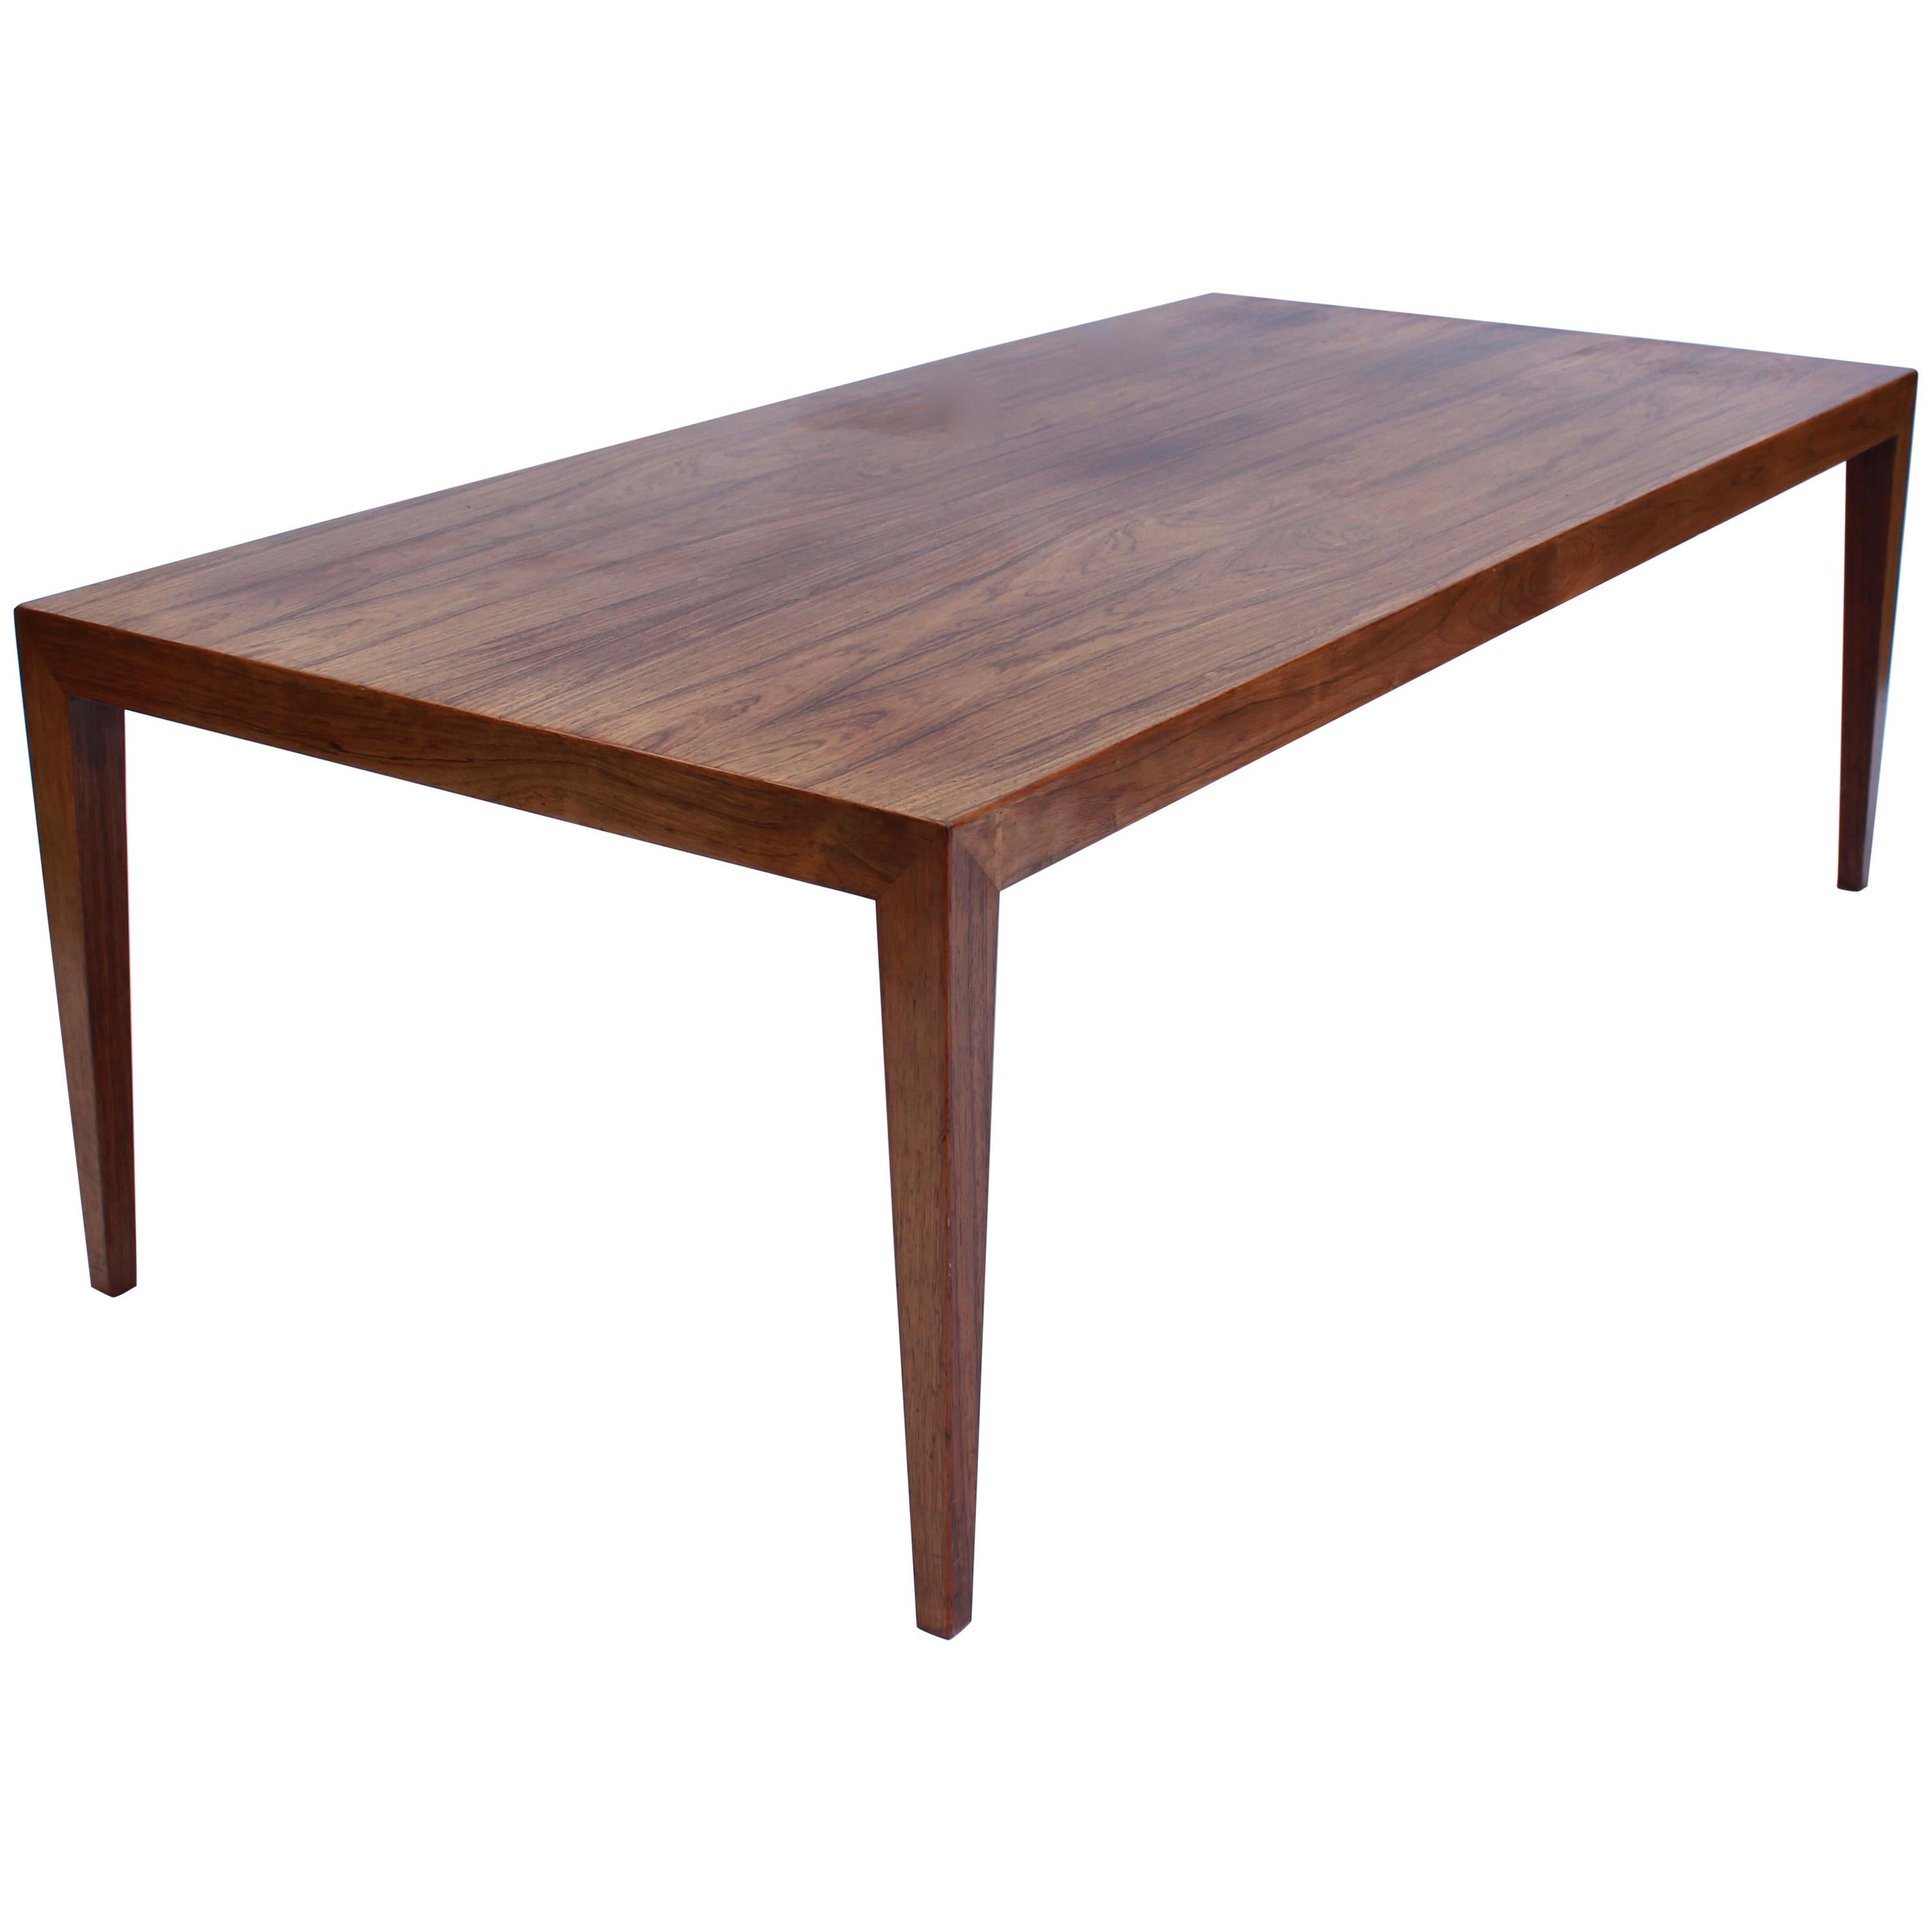 The rosewood coffee table, designed by Severin Hansen and produced by Haslev Møbelfabrik in the 1960s, represents an iconic chapter in the history of Danish furniture design.

Severin Hansen, one of the leading Danish furniture designers of the 20th